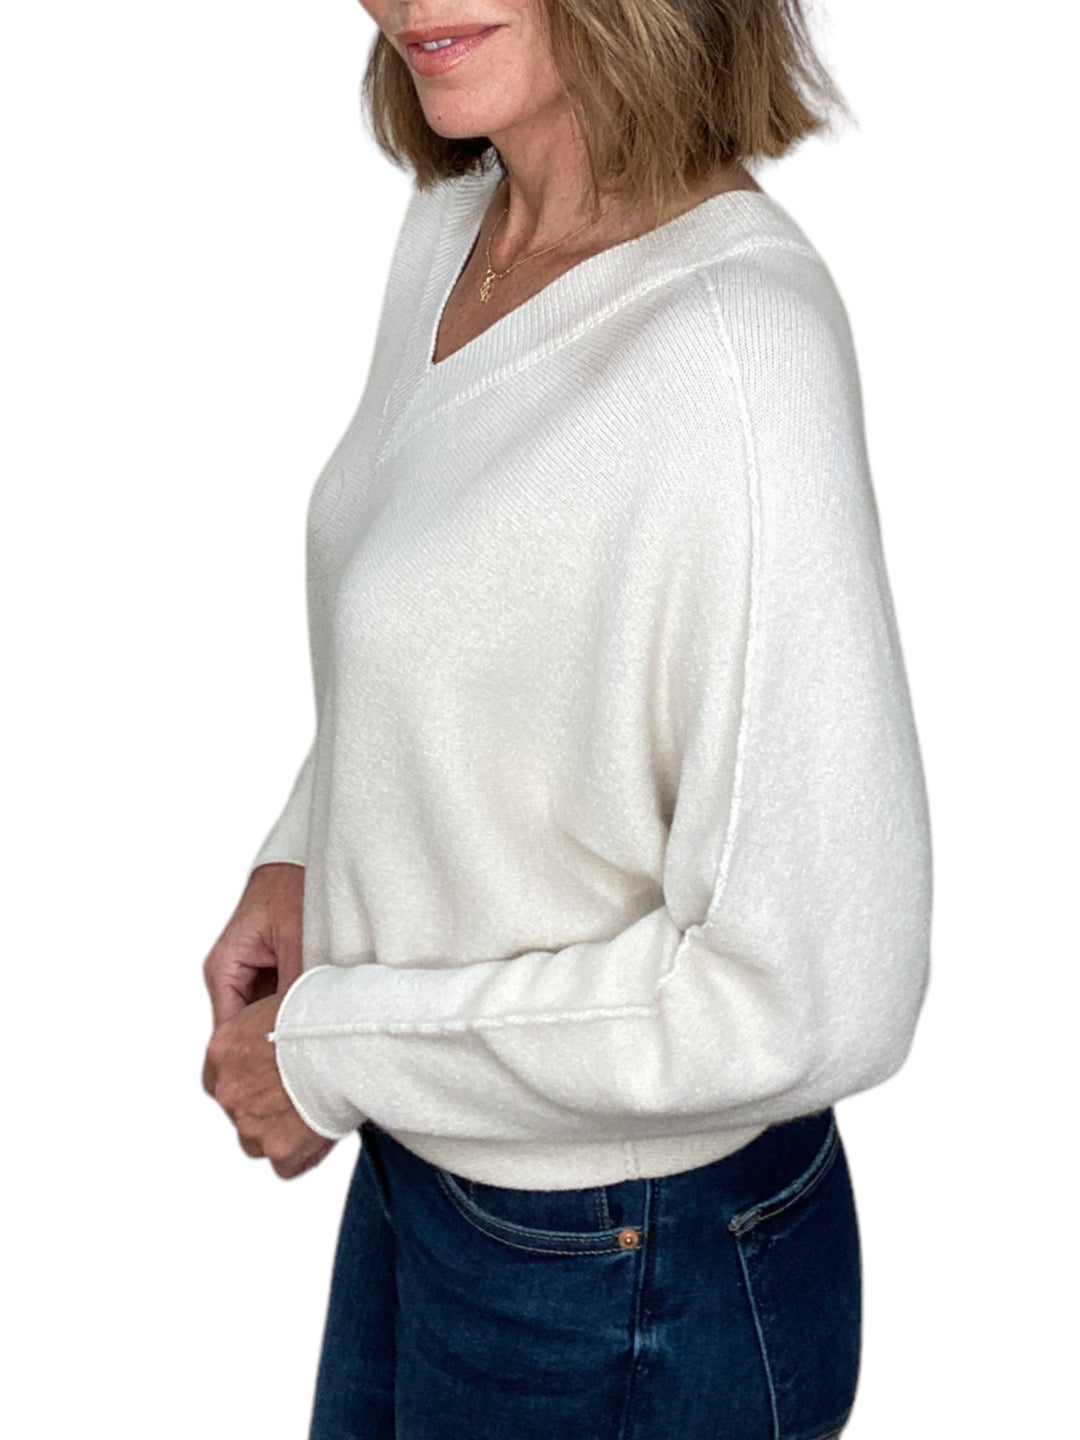 LENNY DOUBLE V NECK BATWING SWEATER-BEIGE - Kingfisher Road - Online Boutique